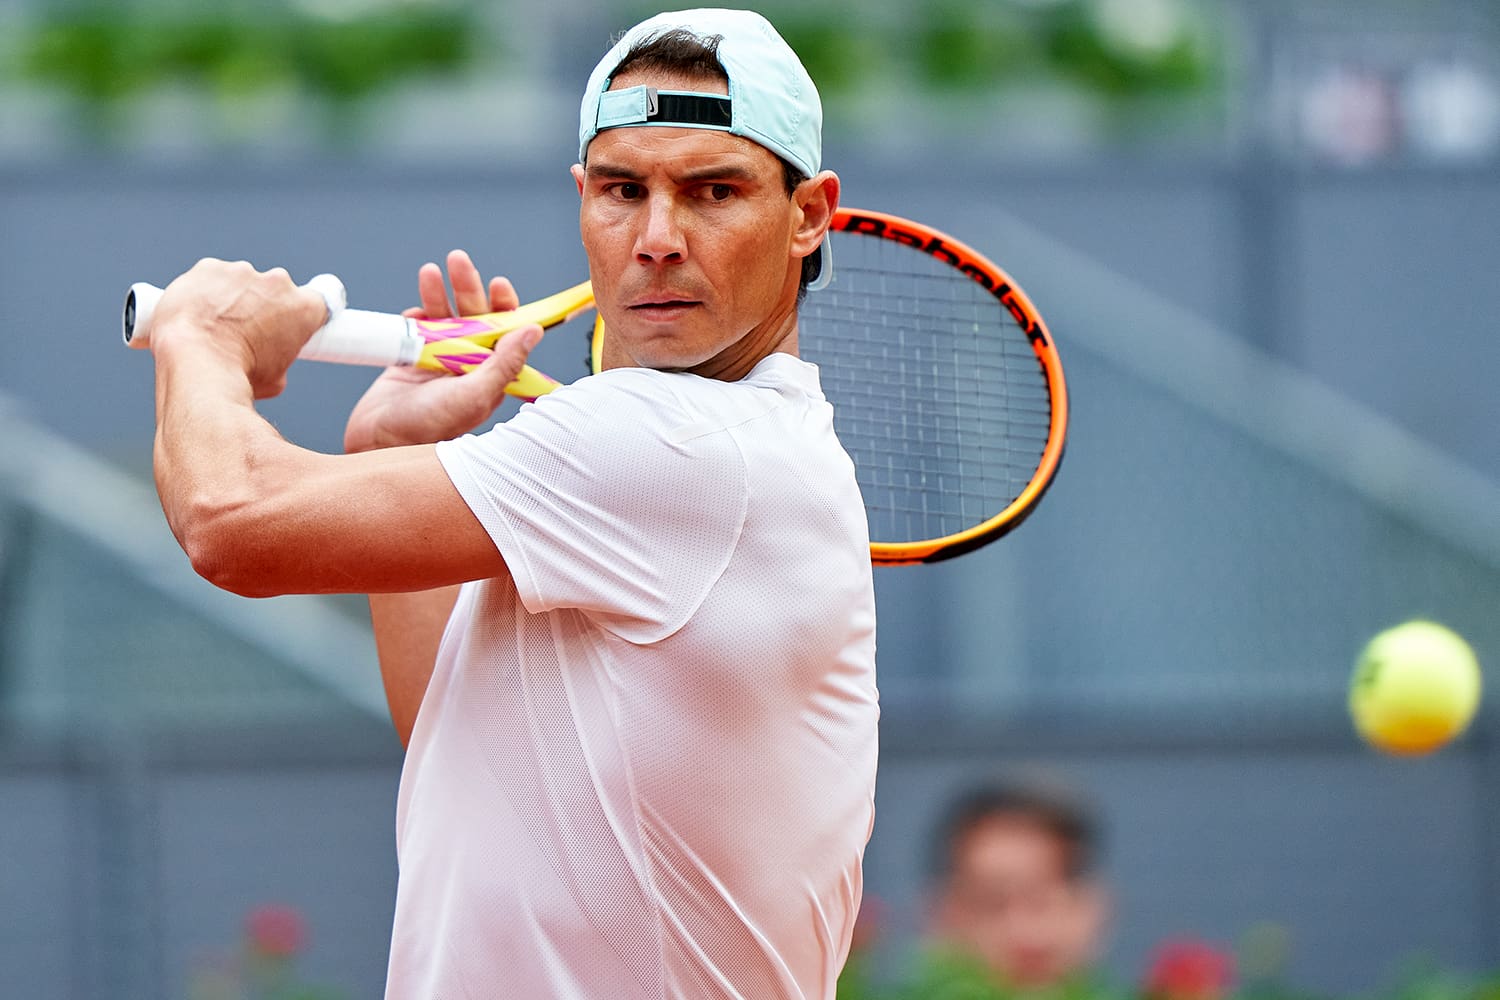 ”tennis-legend-rafael-nadal-confirms-his-first-baby-is-on-the-way”